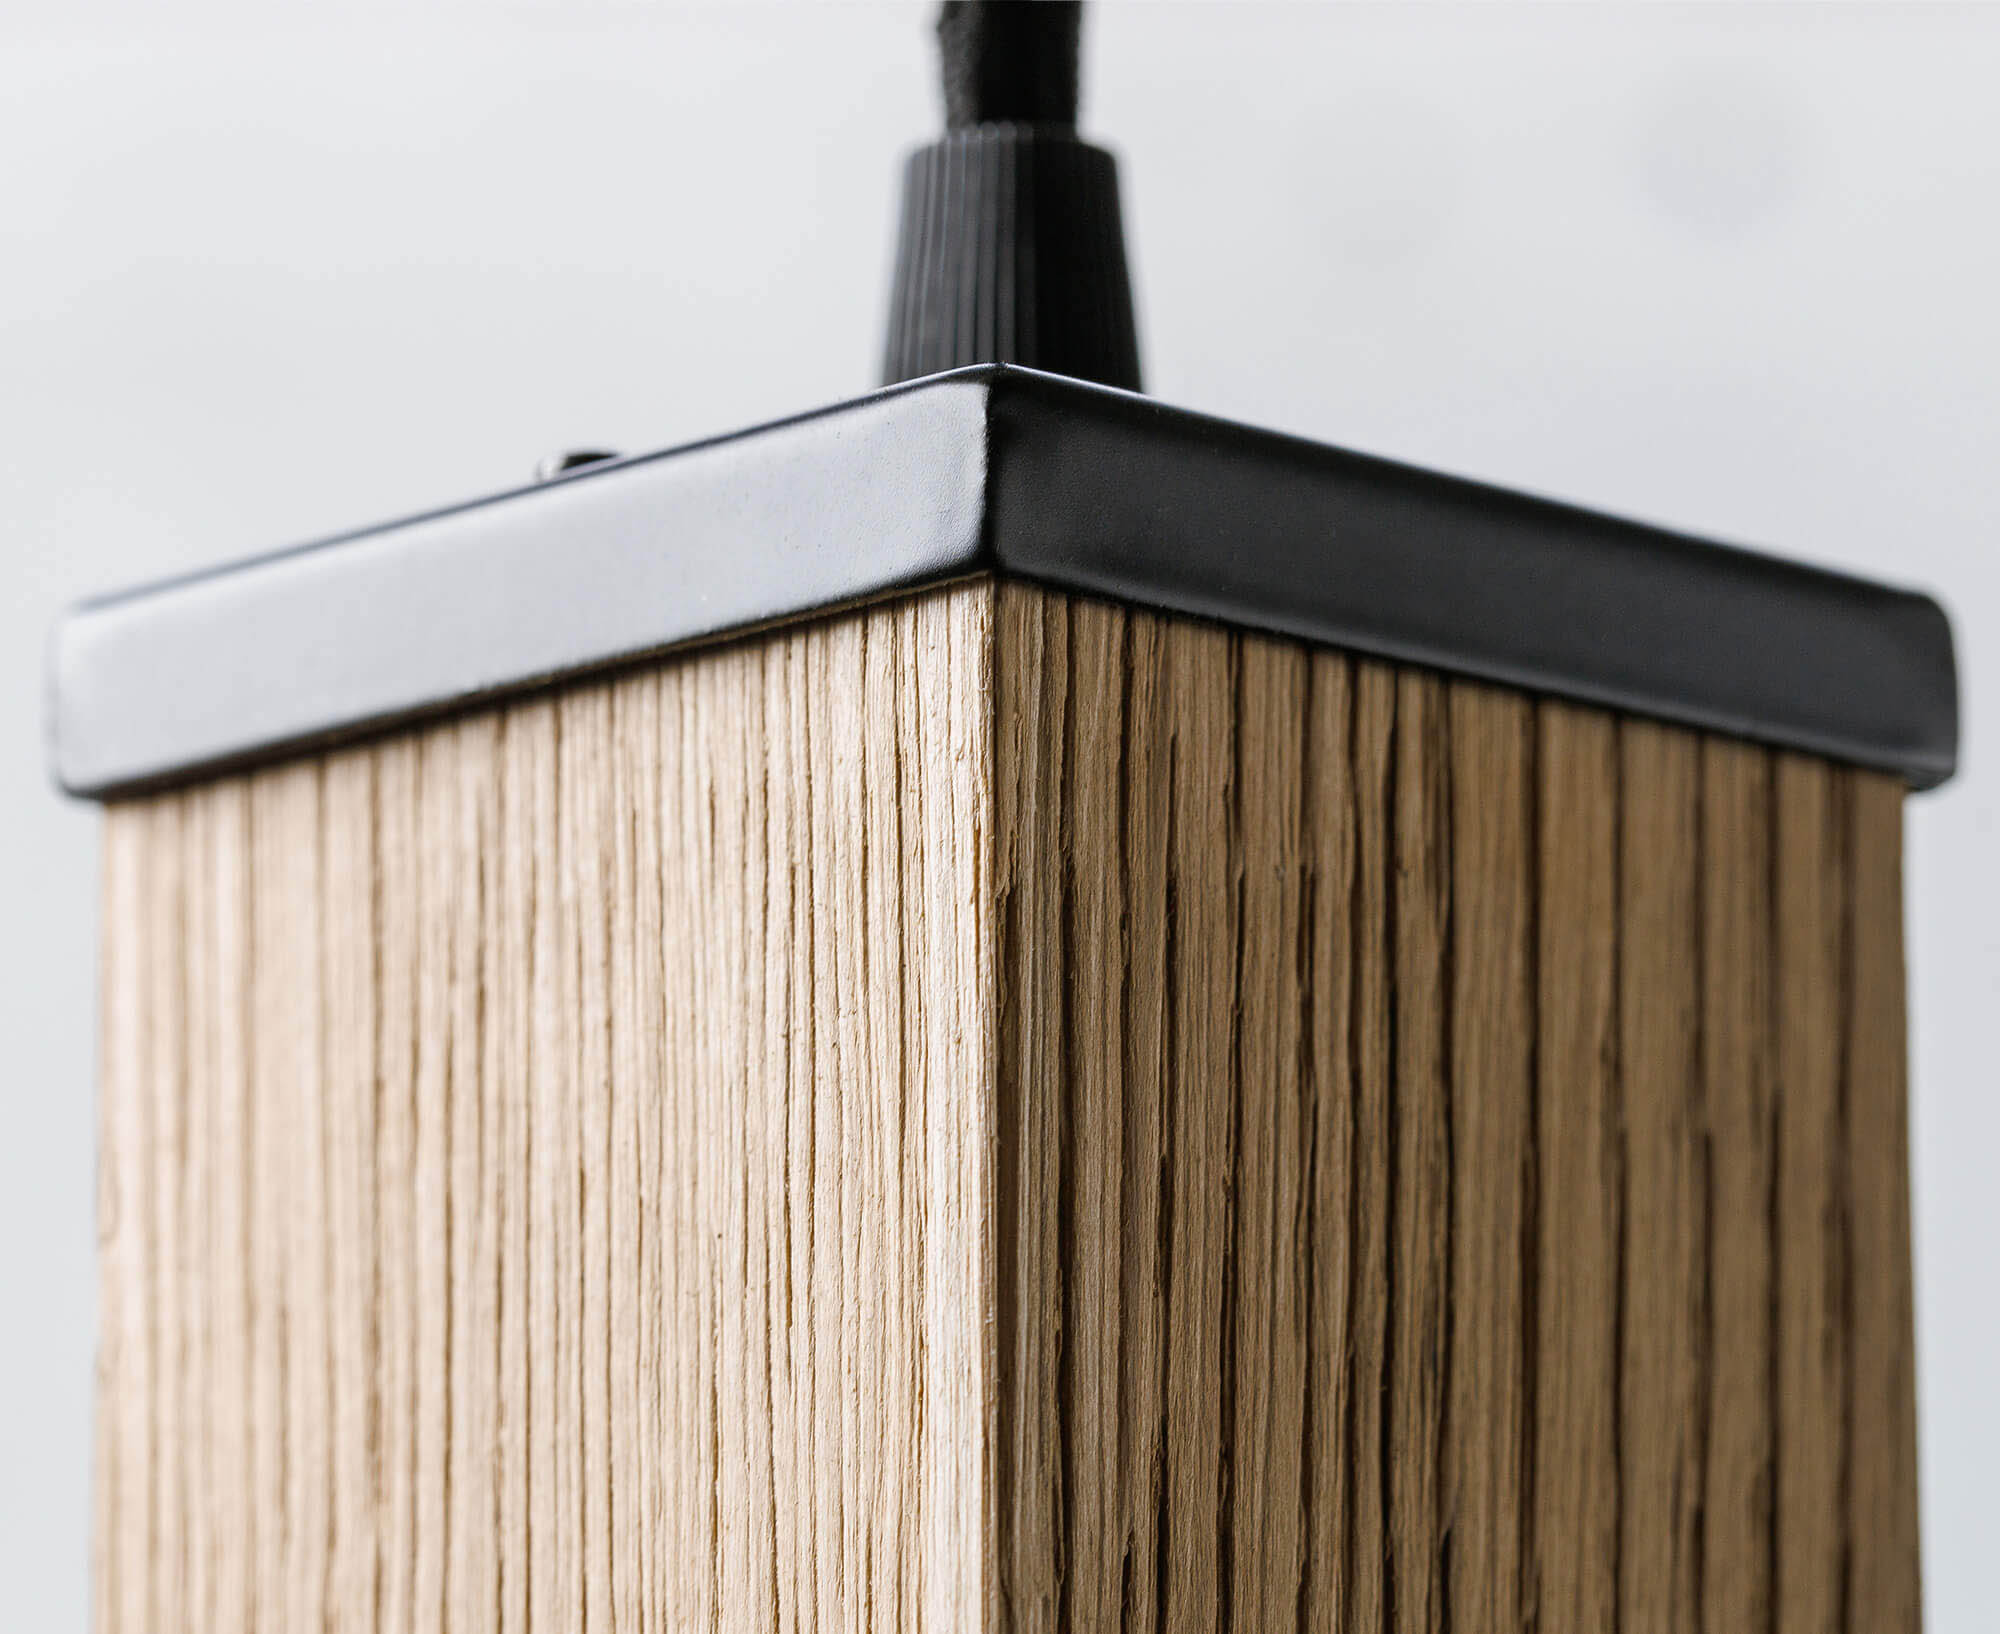 Quality wooden lamp